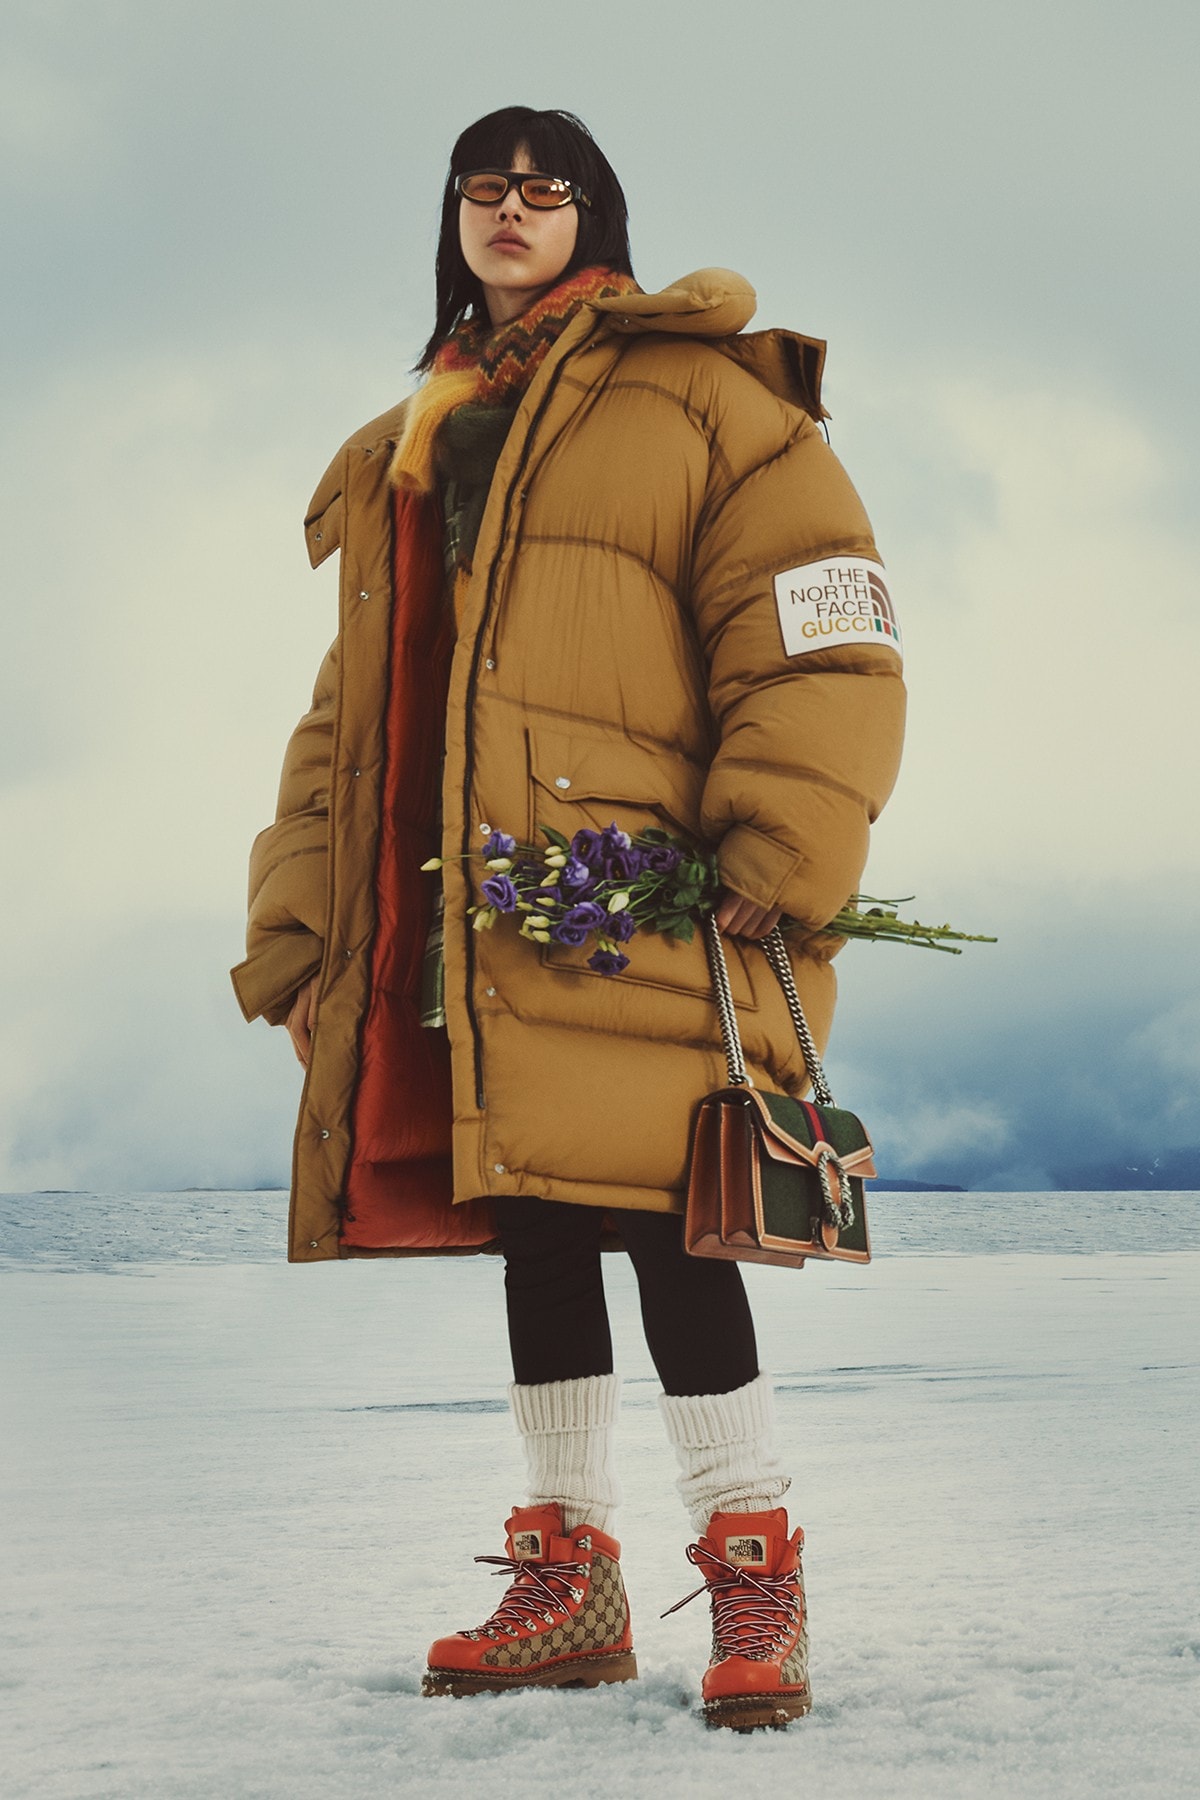 Gucci x The North Face 最新聯乘系列「The Second Chapter」形象廣告正式發佈